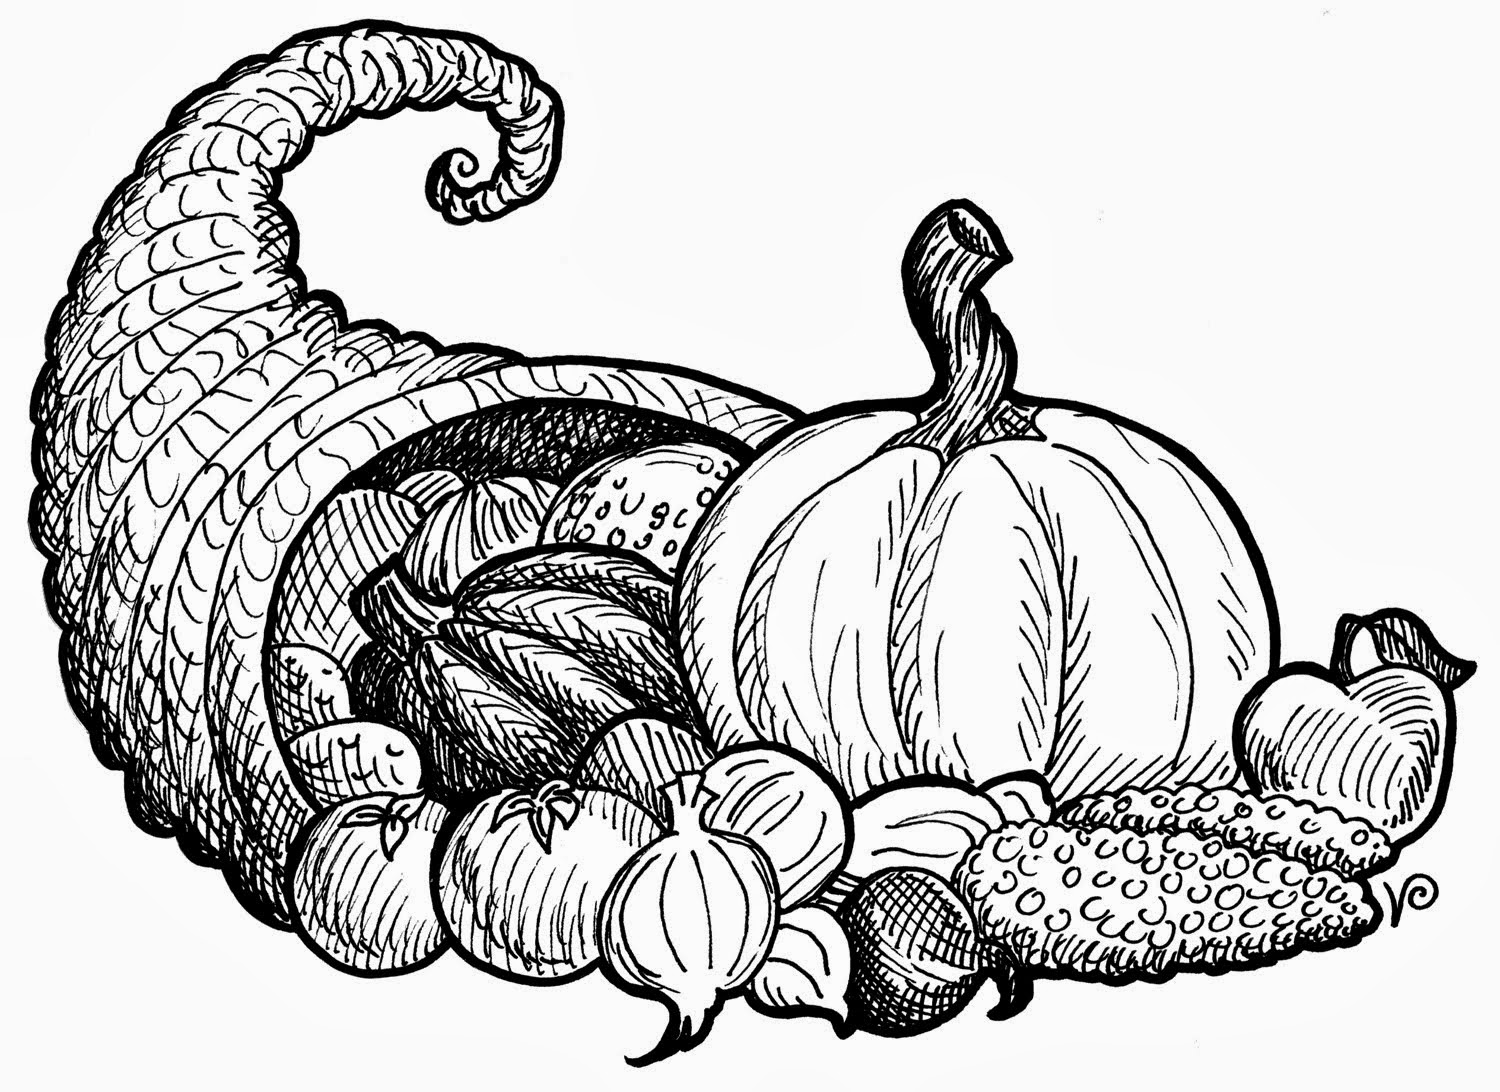 black and white thanksgiving food clipart